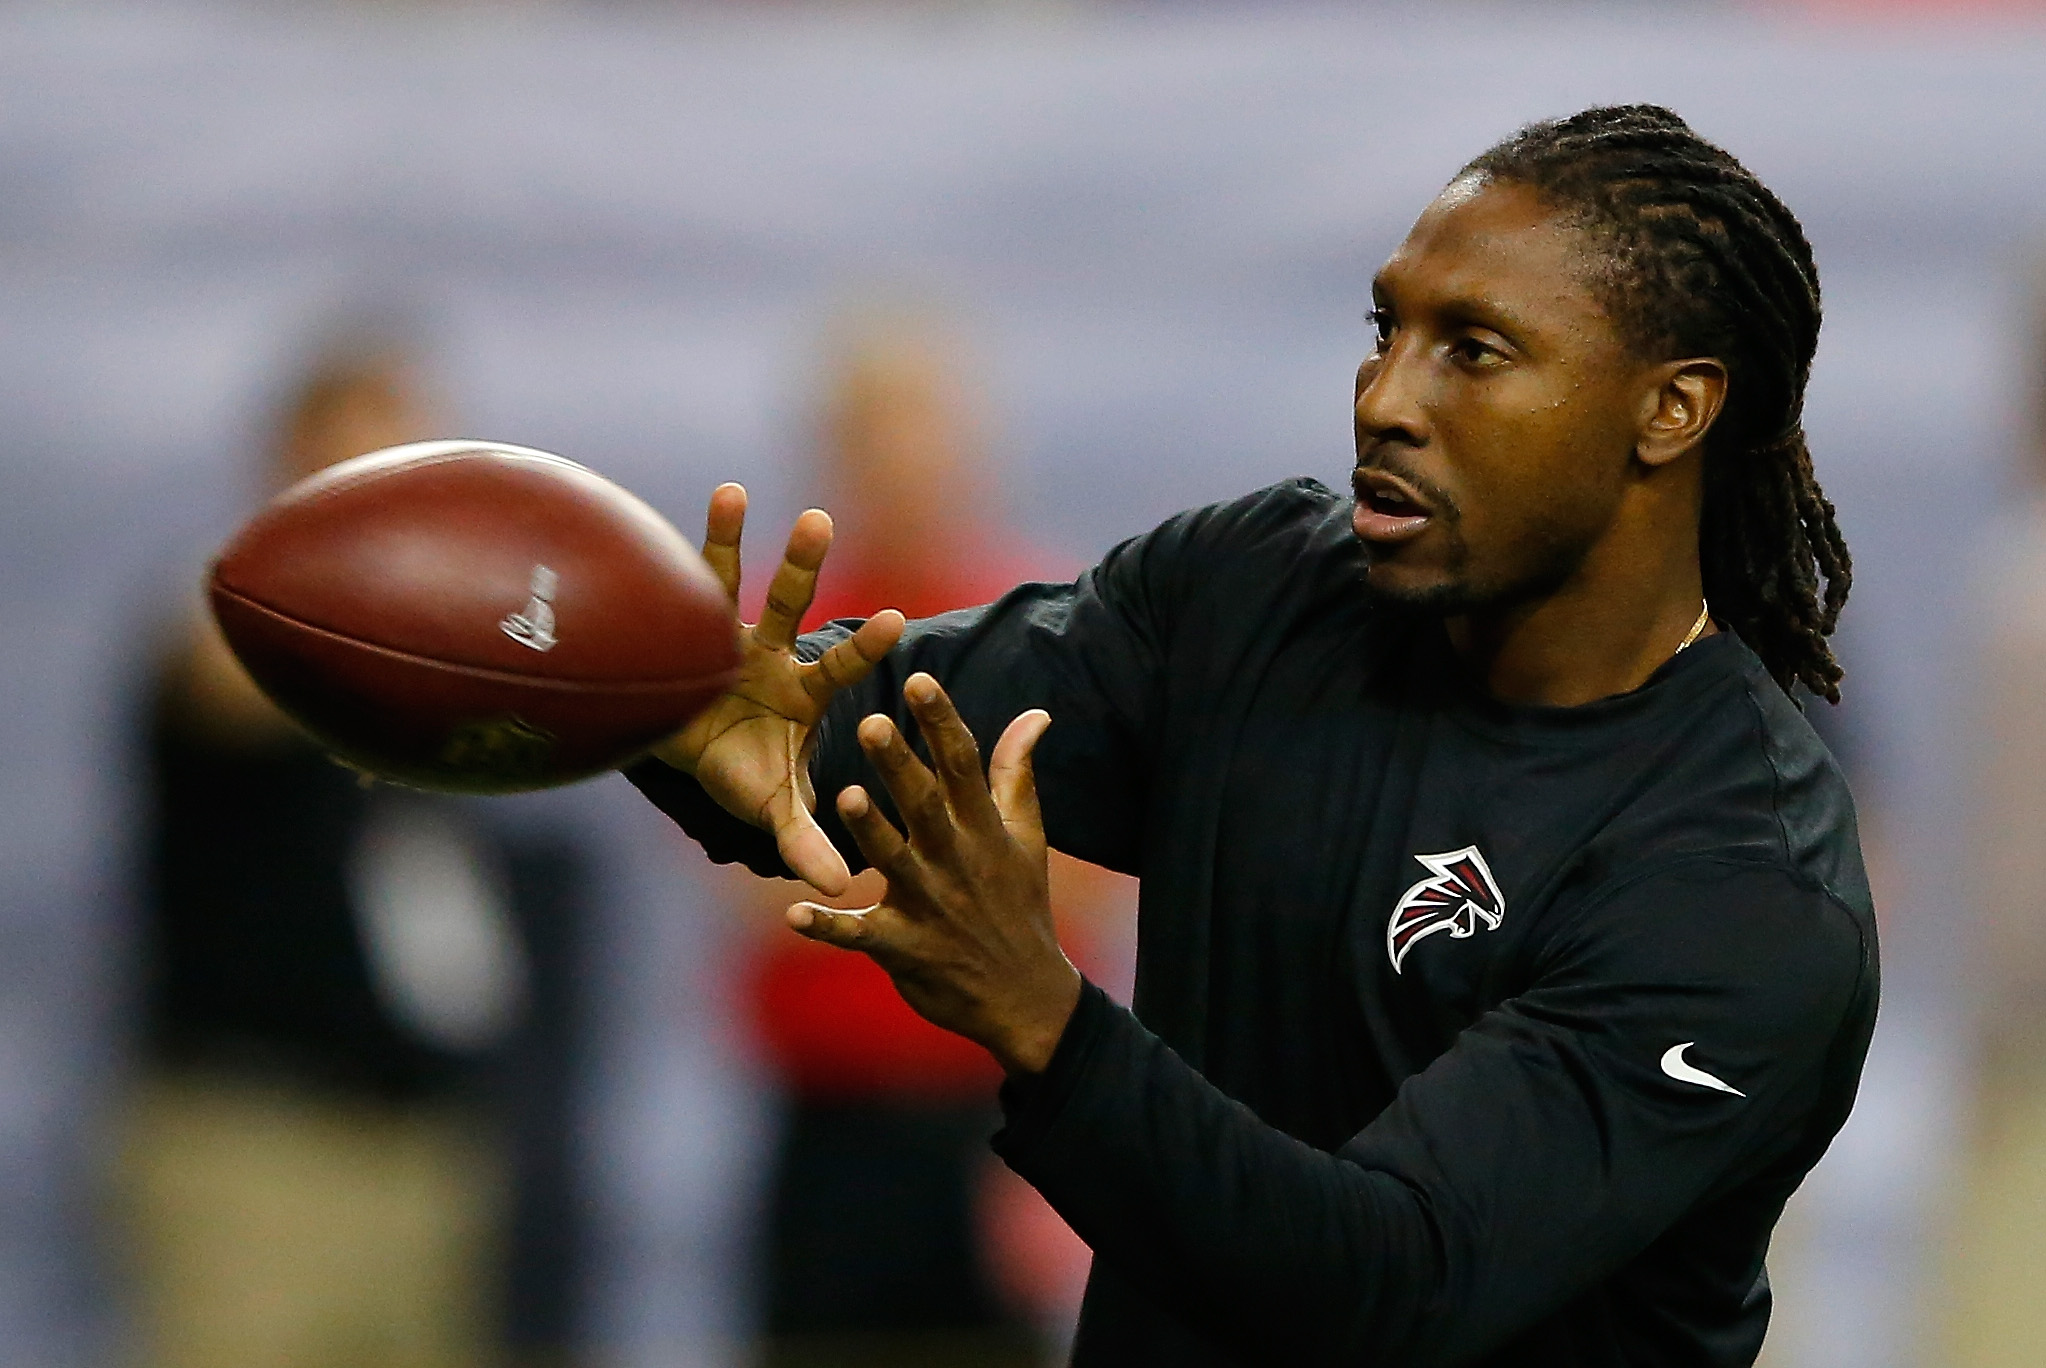 Roddy White Lost $10,000 by Showing Support for Michael Vick